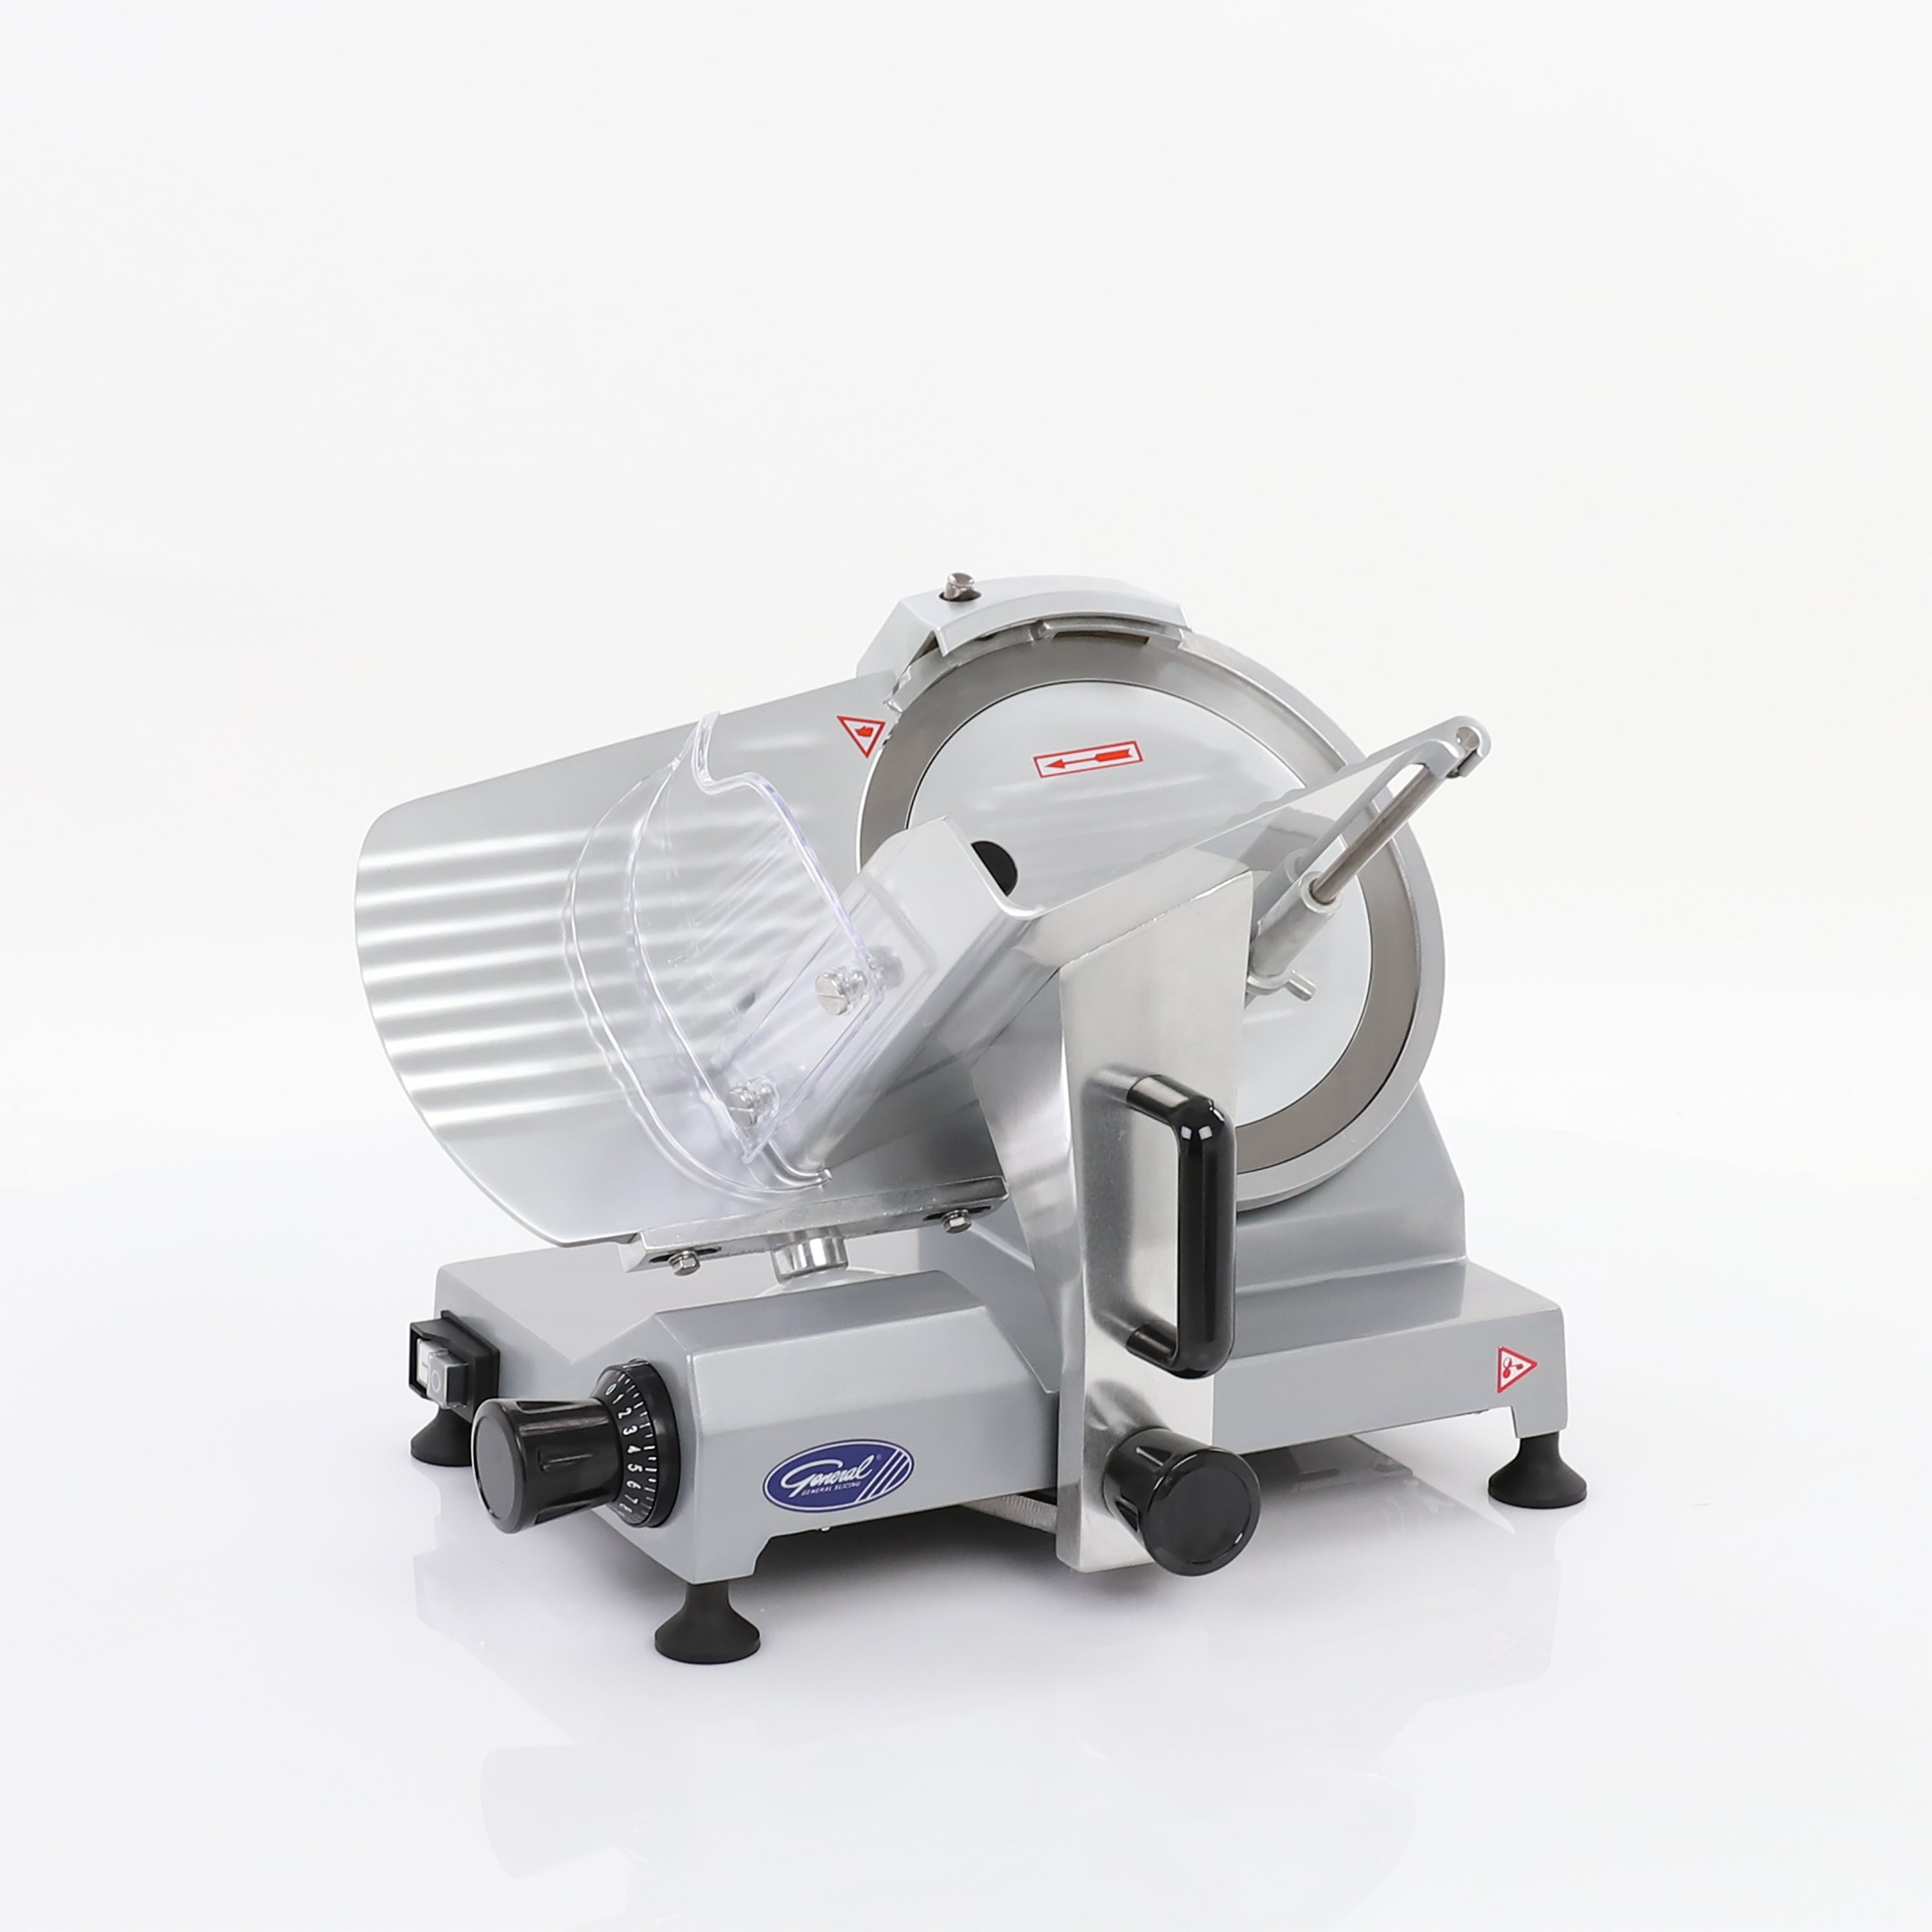 General - GSE010, General Foodservice Manual Commercial Food Slicer, 10 Inch Knife, Medium Duty, in Stainless Steel